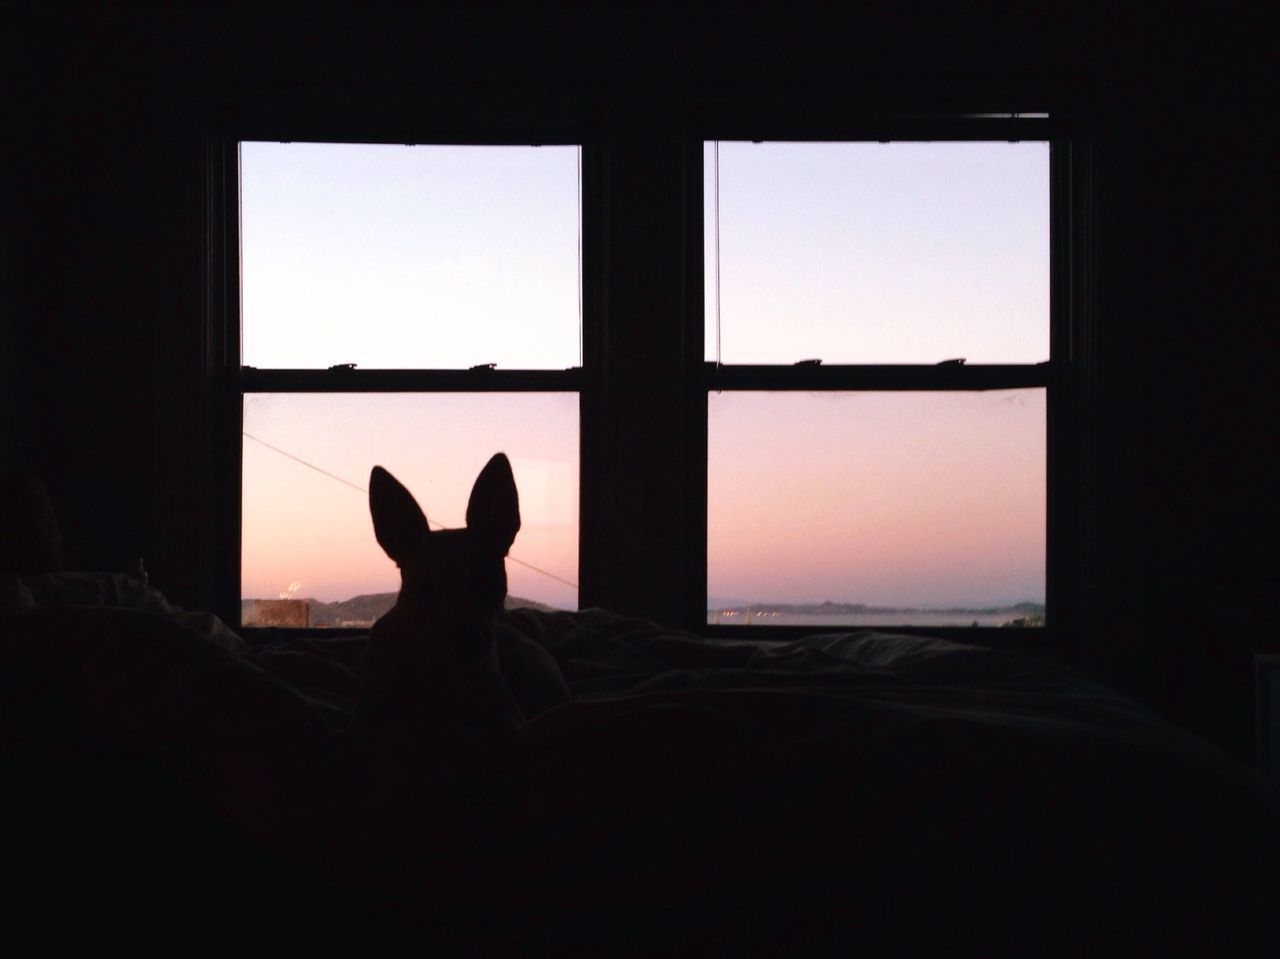 indoors, silhouette, window, copy space, sitting, looking through window, pets, relaxation, home interior, dark, lifestyles, glass - material, one animal, men, animal themes, sunset, standing, outline